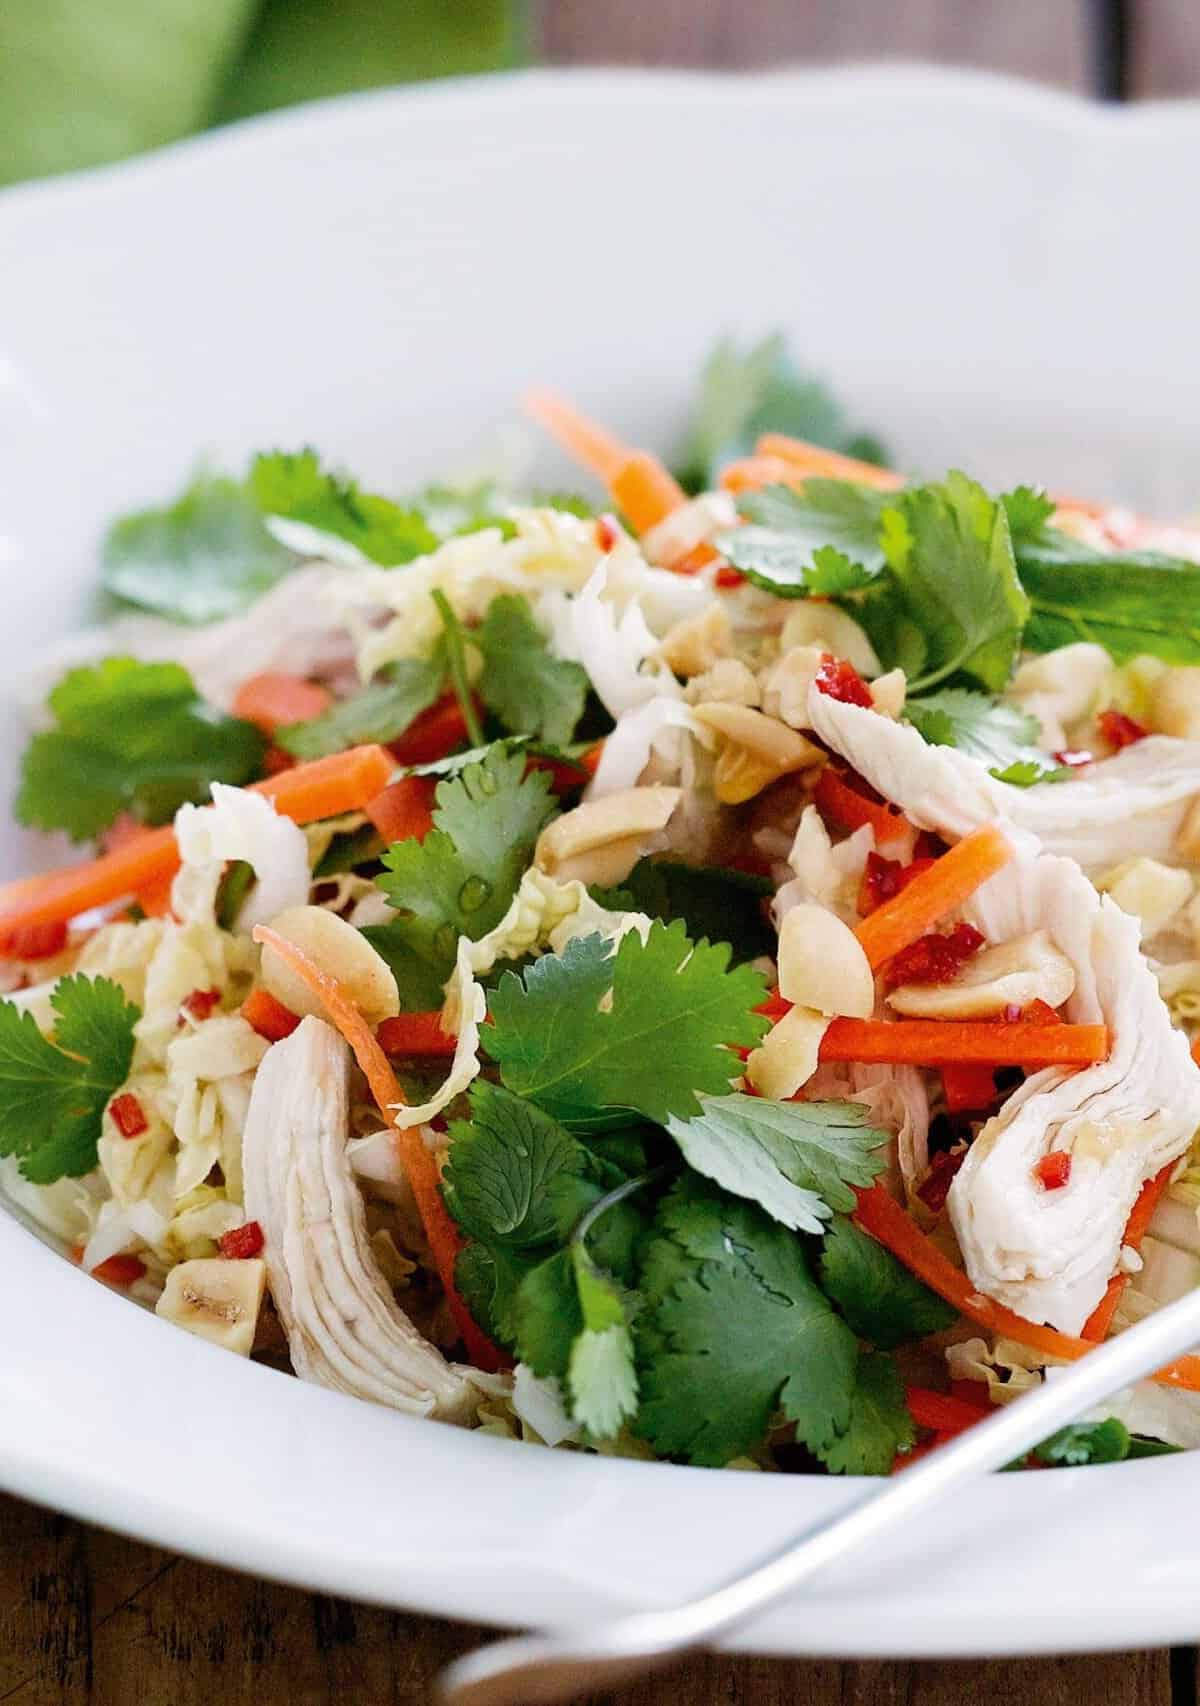  Say goodbye to boring salads - this Vietnamese twist will keep your taste buds satisfied.